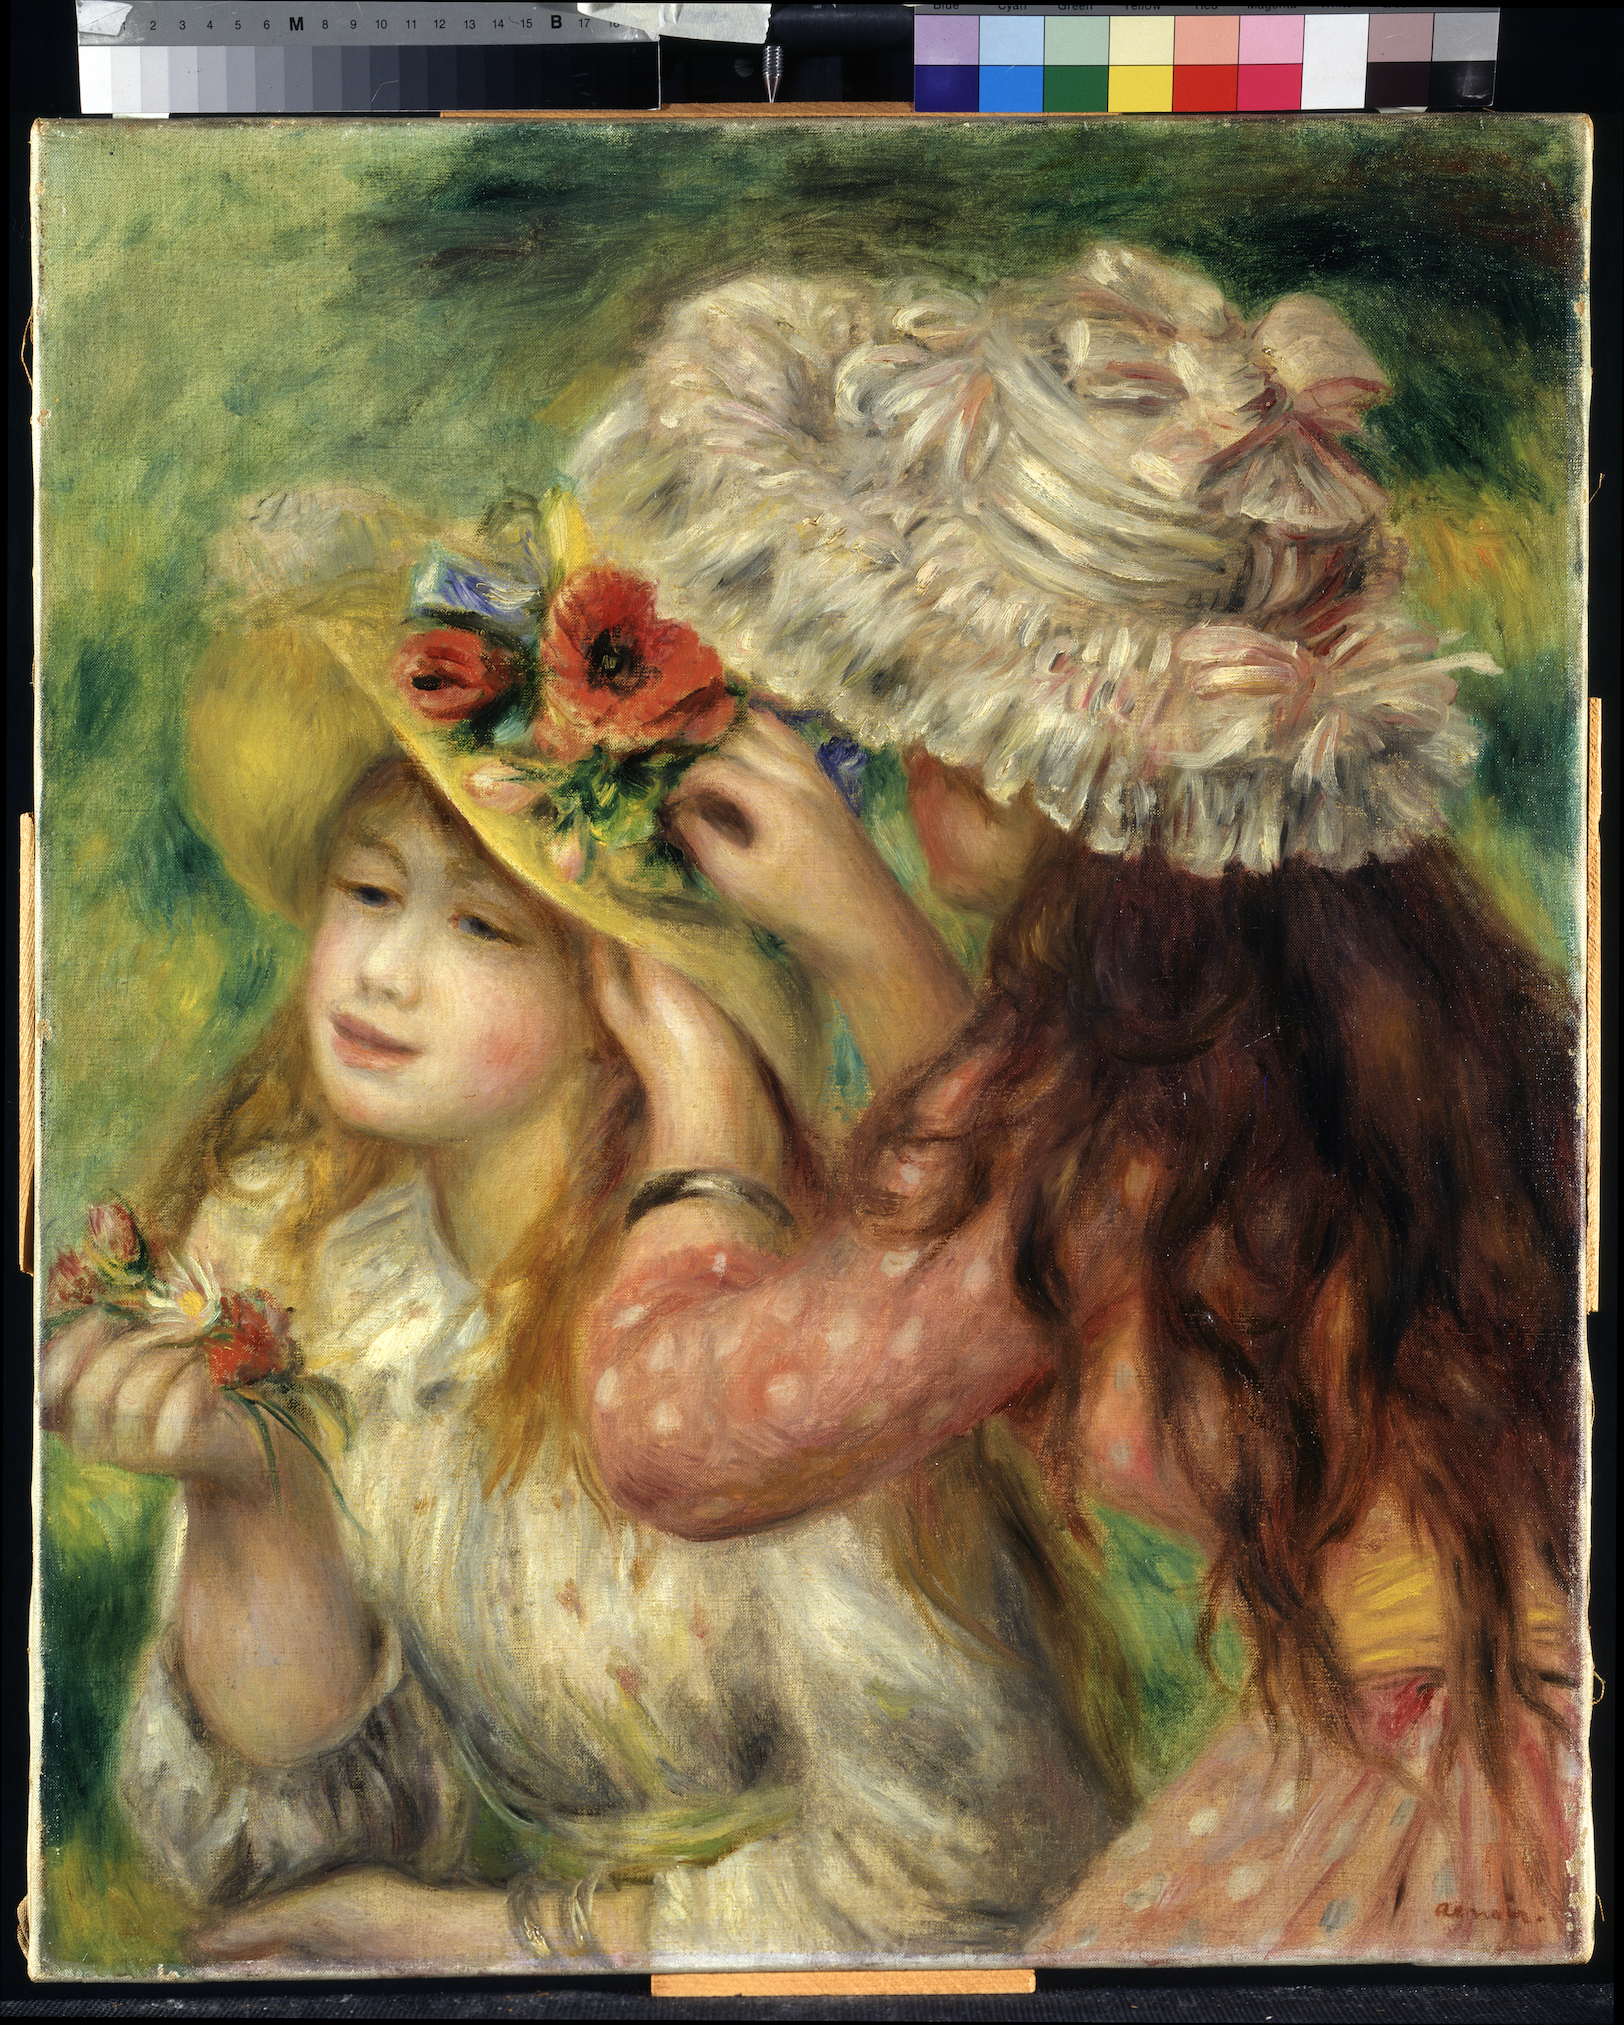 A painting of two girls decorating a hat. On the right is a brunette seen from behind, andon the left is a strawberry blonde girl. The sketch rests on a large brown paper. Above it is a grid of an assortment of colors.